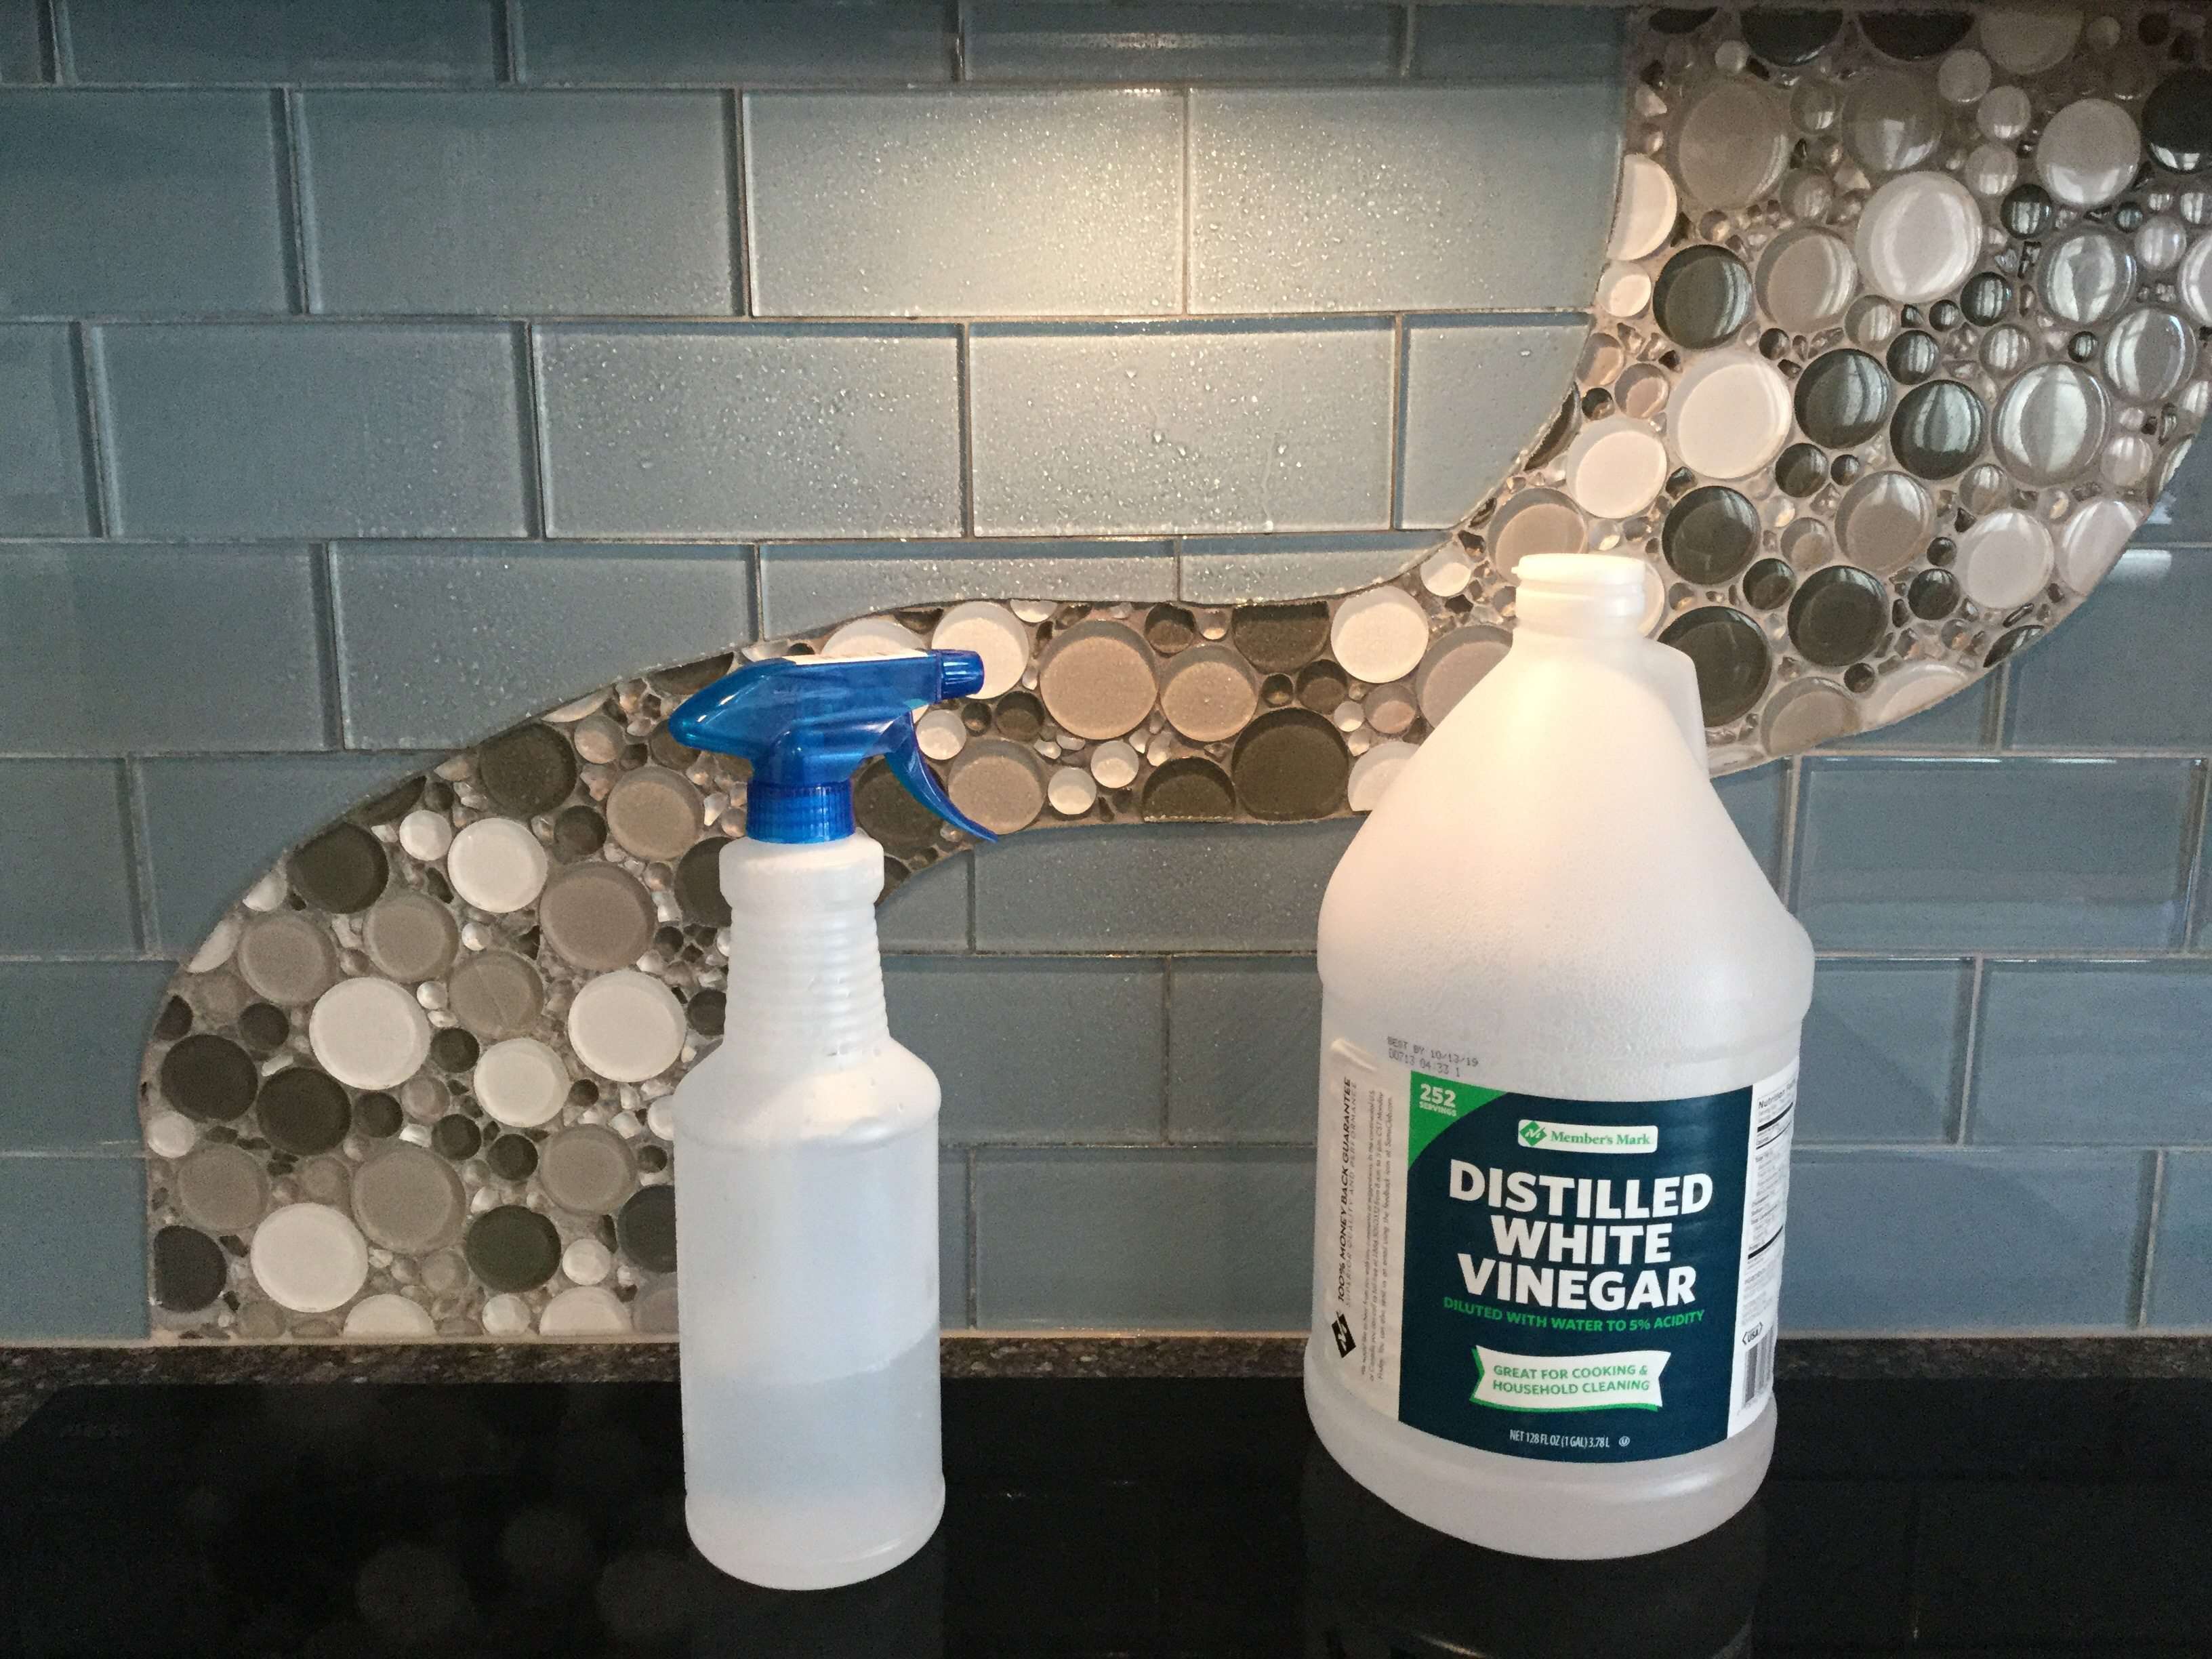 Pour your vinegar in the spray bottle. You can dilute it if you want, but don’t need to. The acidity in the vinegar will cut the grease and what will be disinfecting your back splash. Spray your back splash with the vinegar and wipe it down with a clean wash cloth (it’s important that it is clean or you will get streaks).